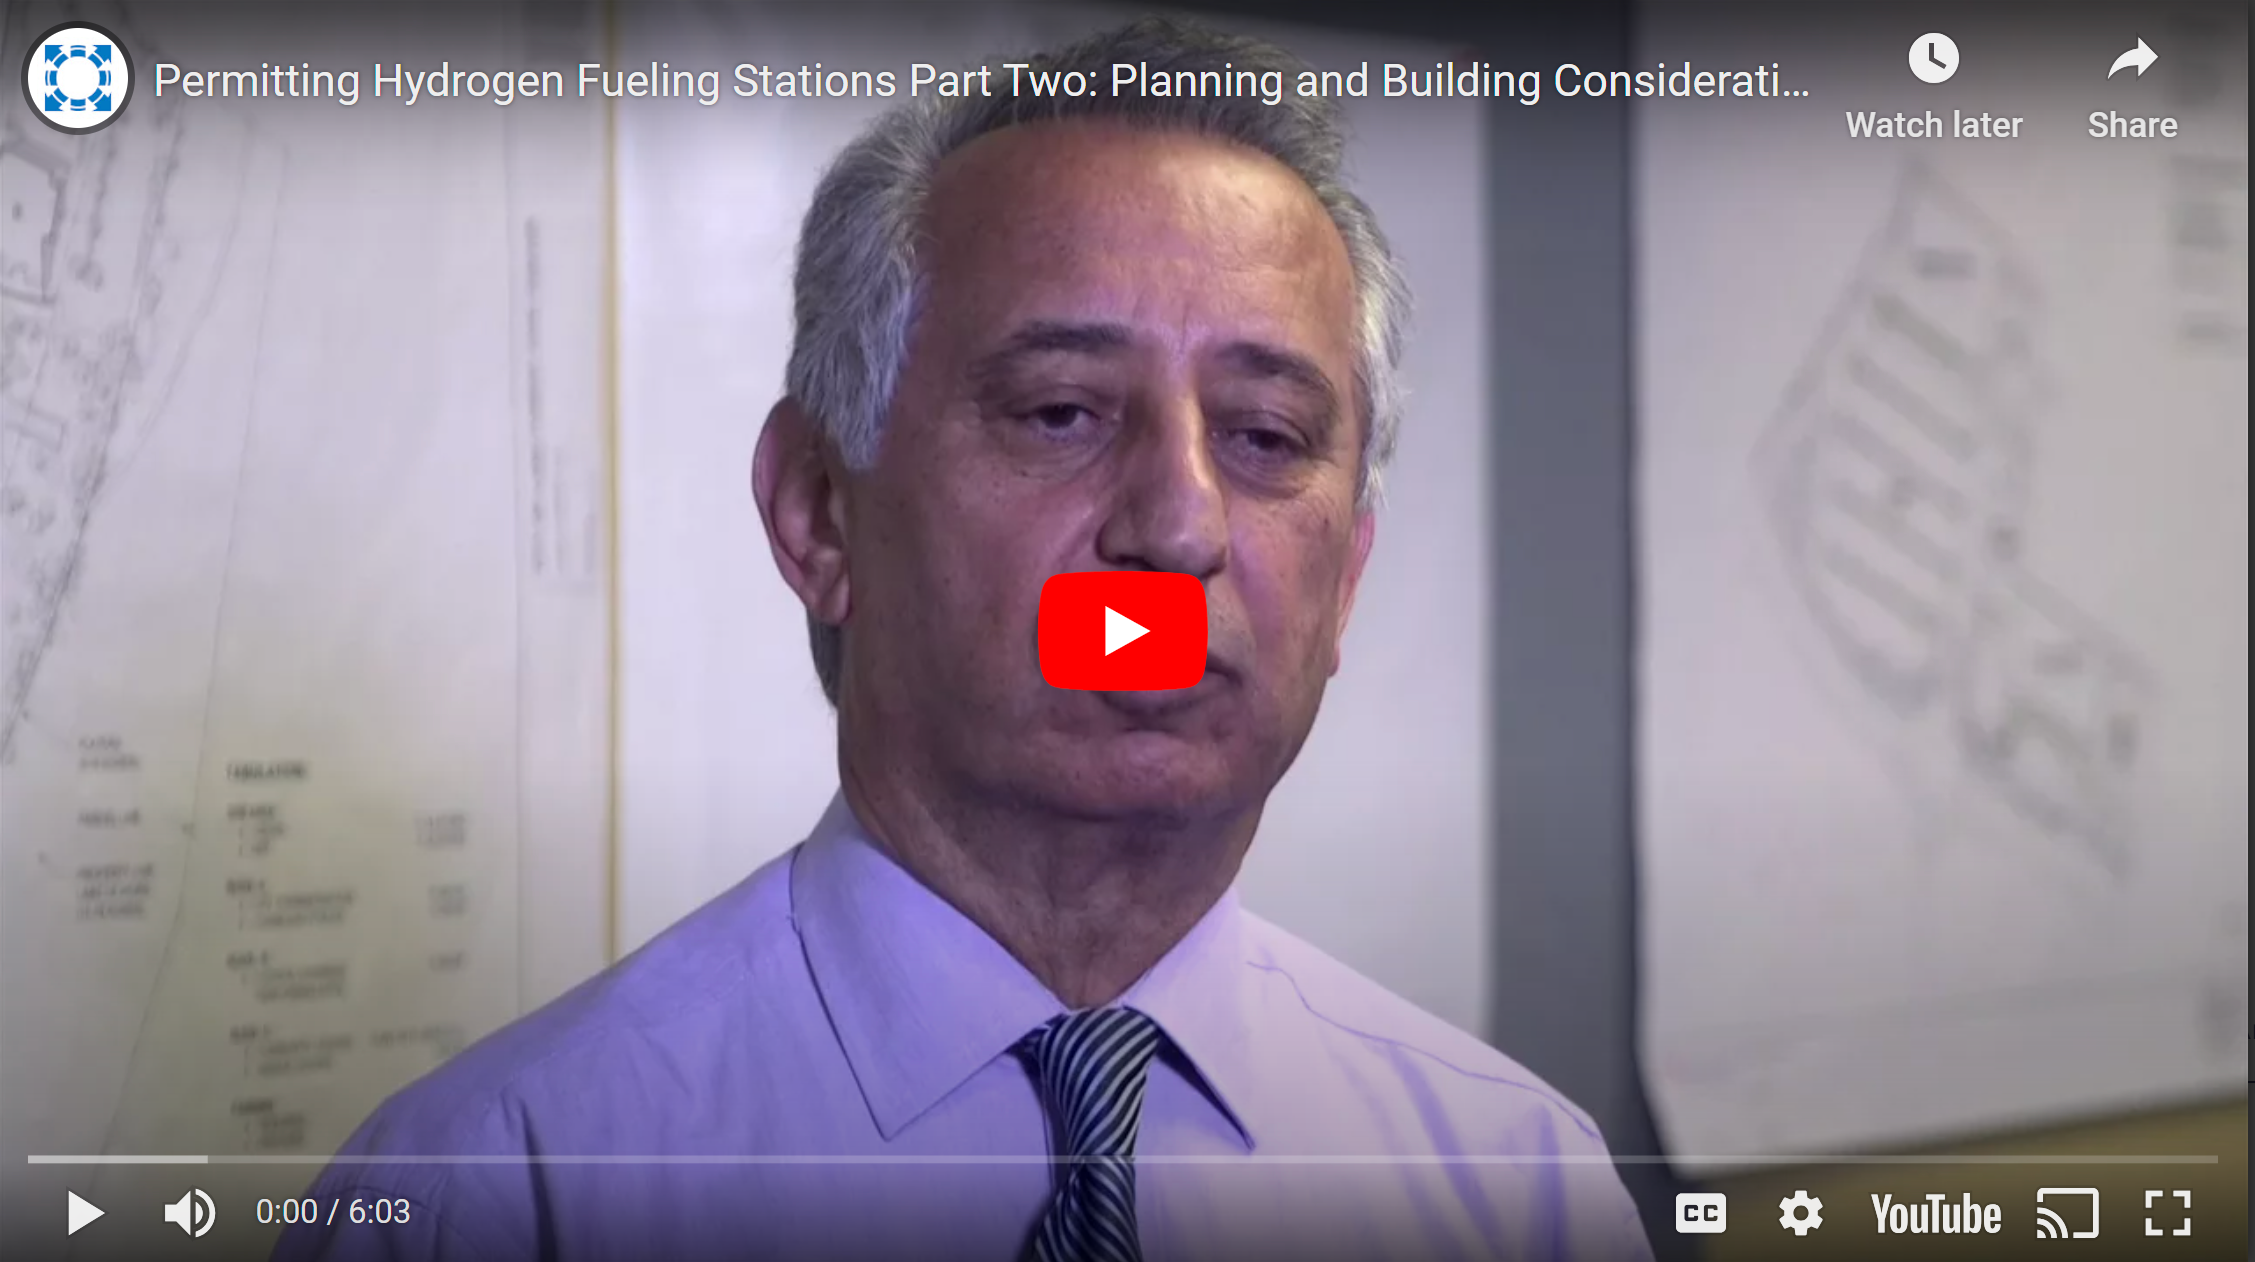 Permitting Hydrogen Fueling Stations Part Two: Planning and Building Considerations